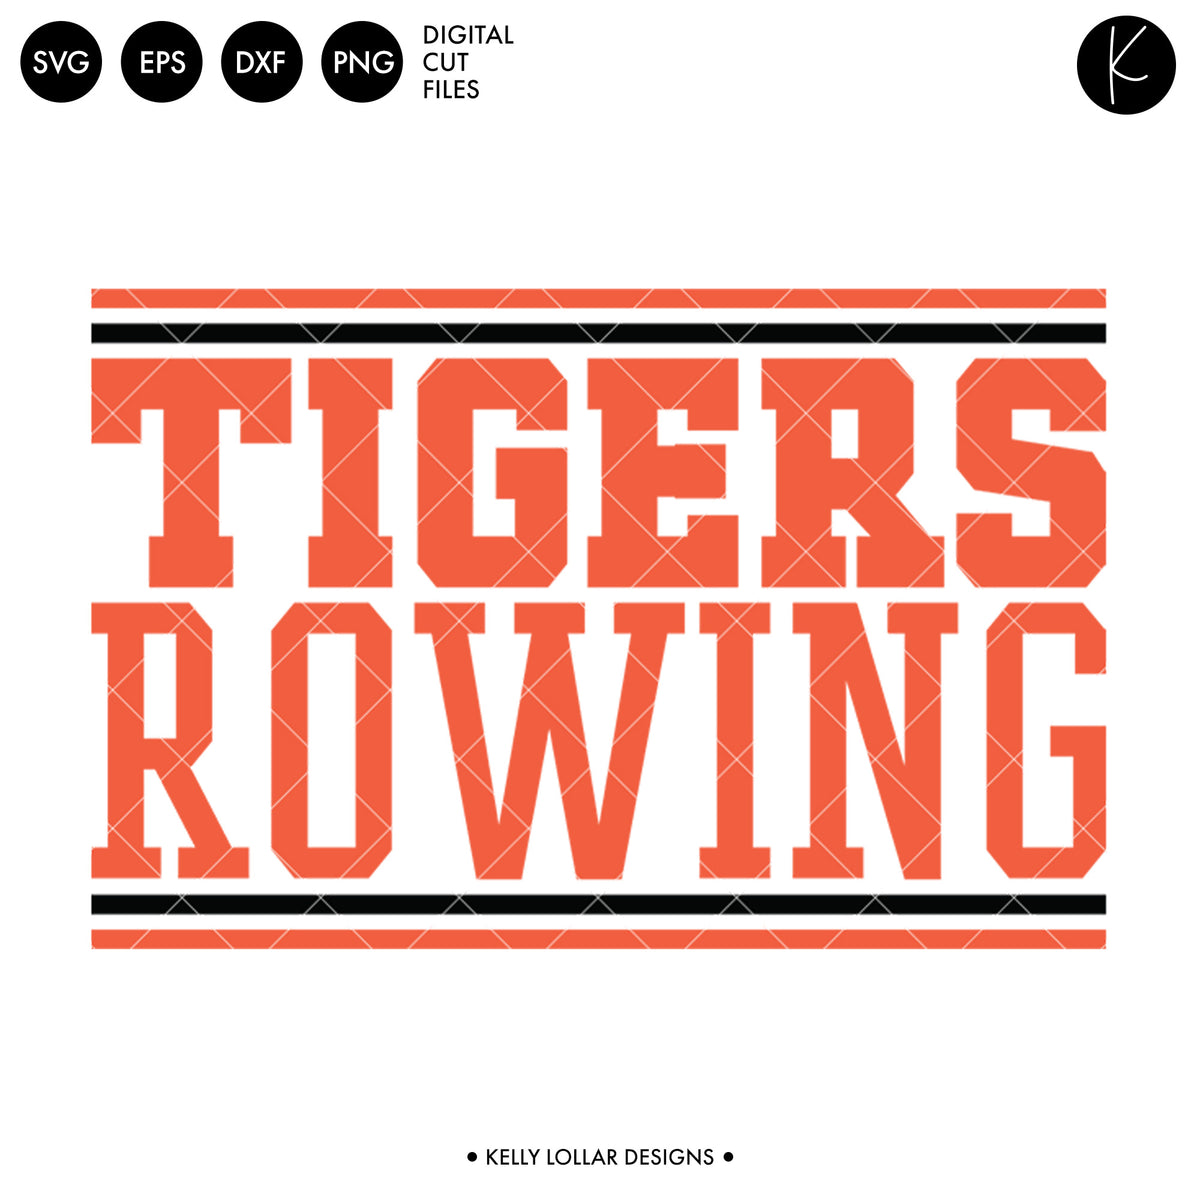 Tigers Rowing Crew Bundle | SVG DXF EPS PNG Cut Files